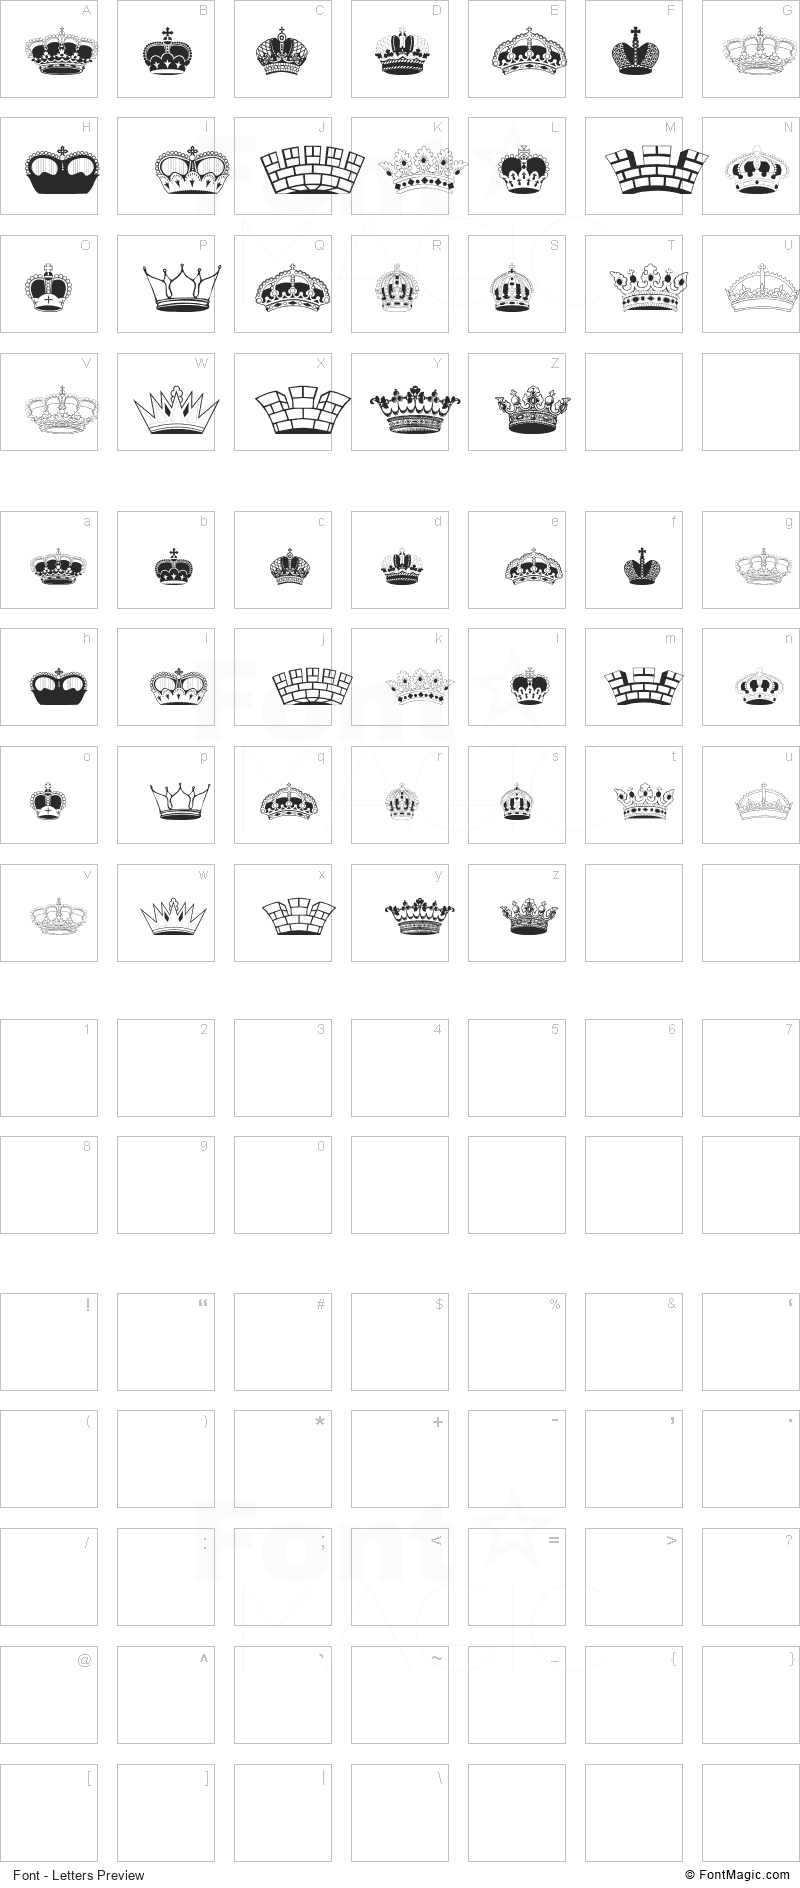 Intellecta Crowns Font - All Latters Preview Chart